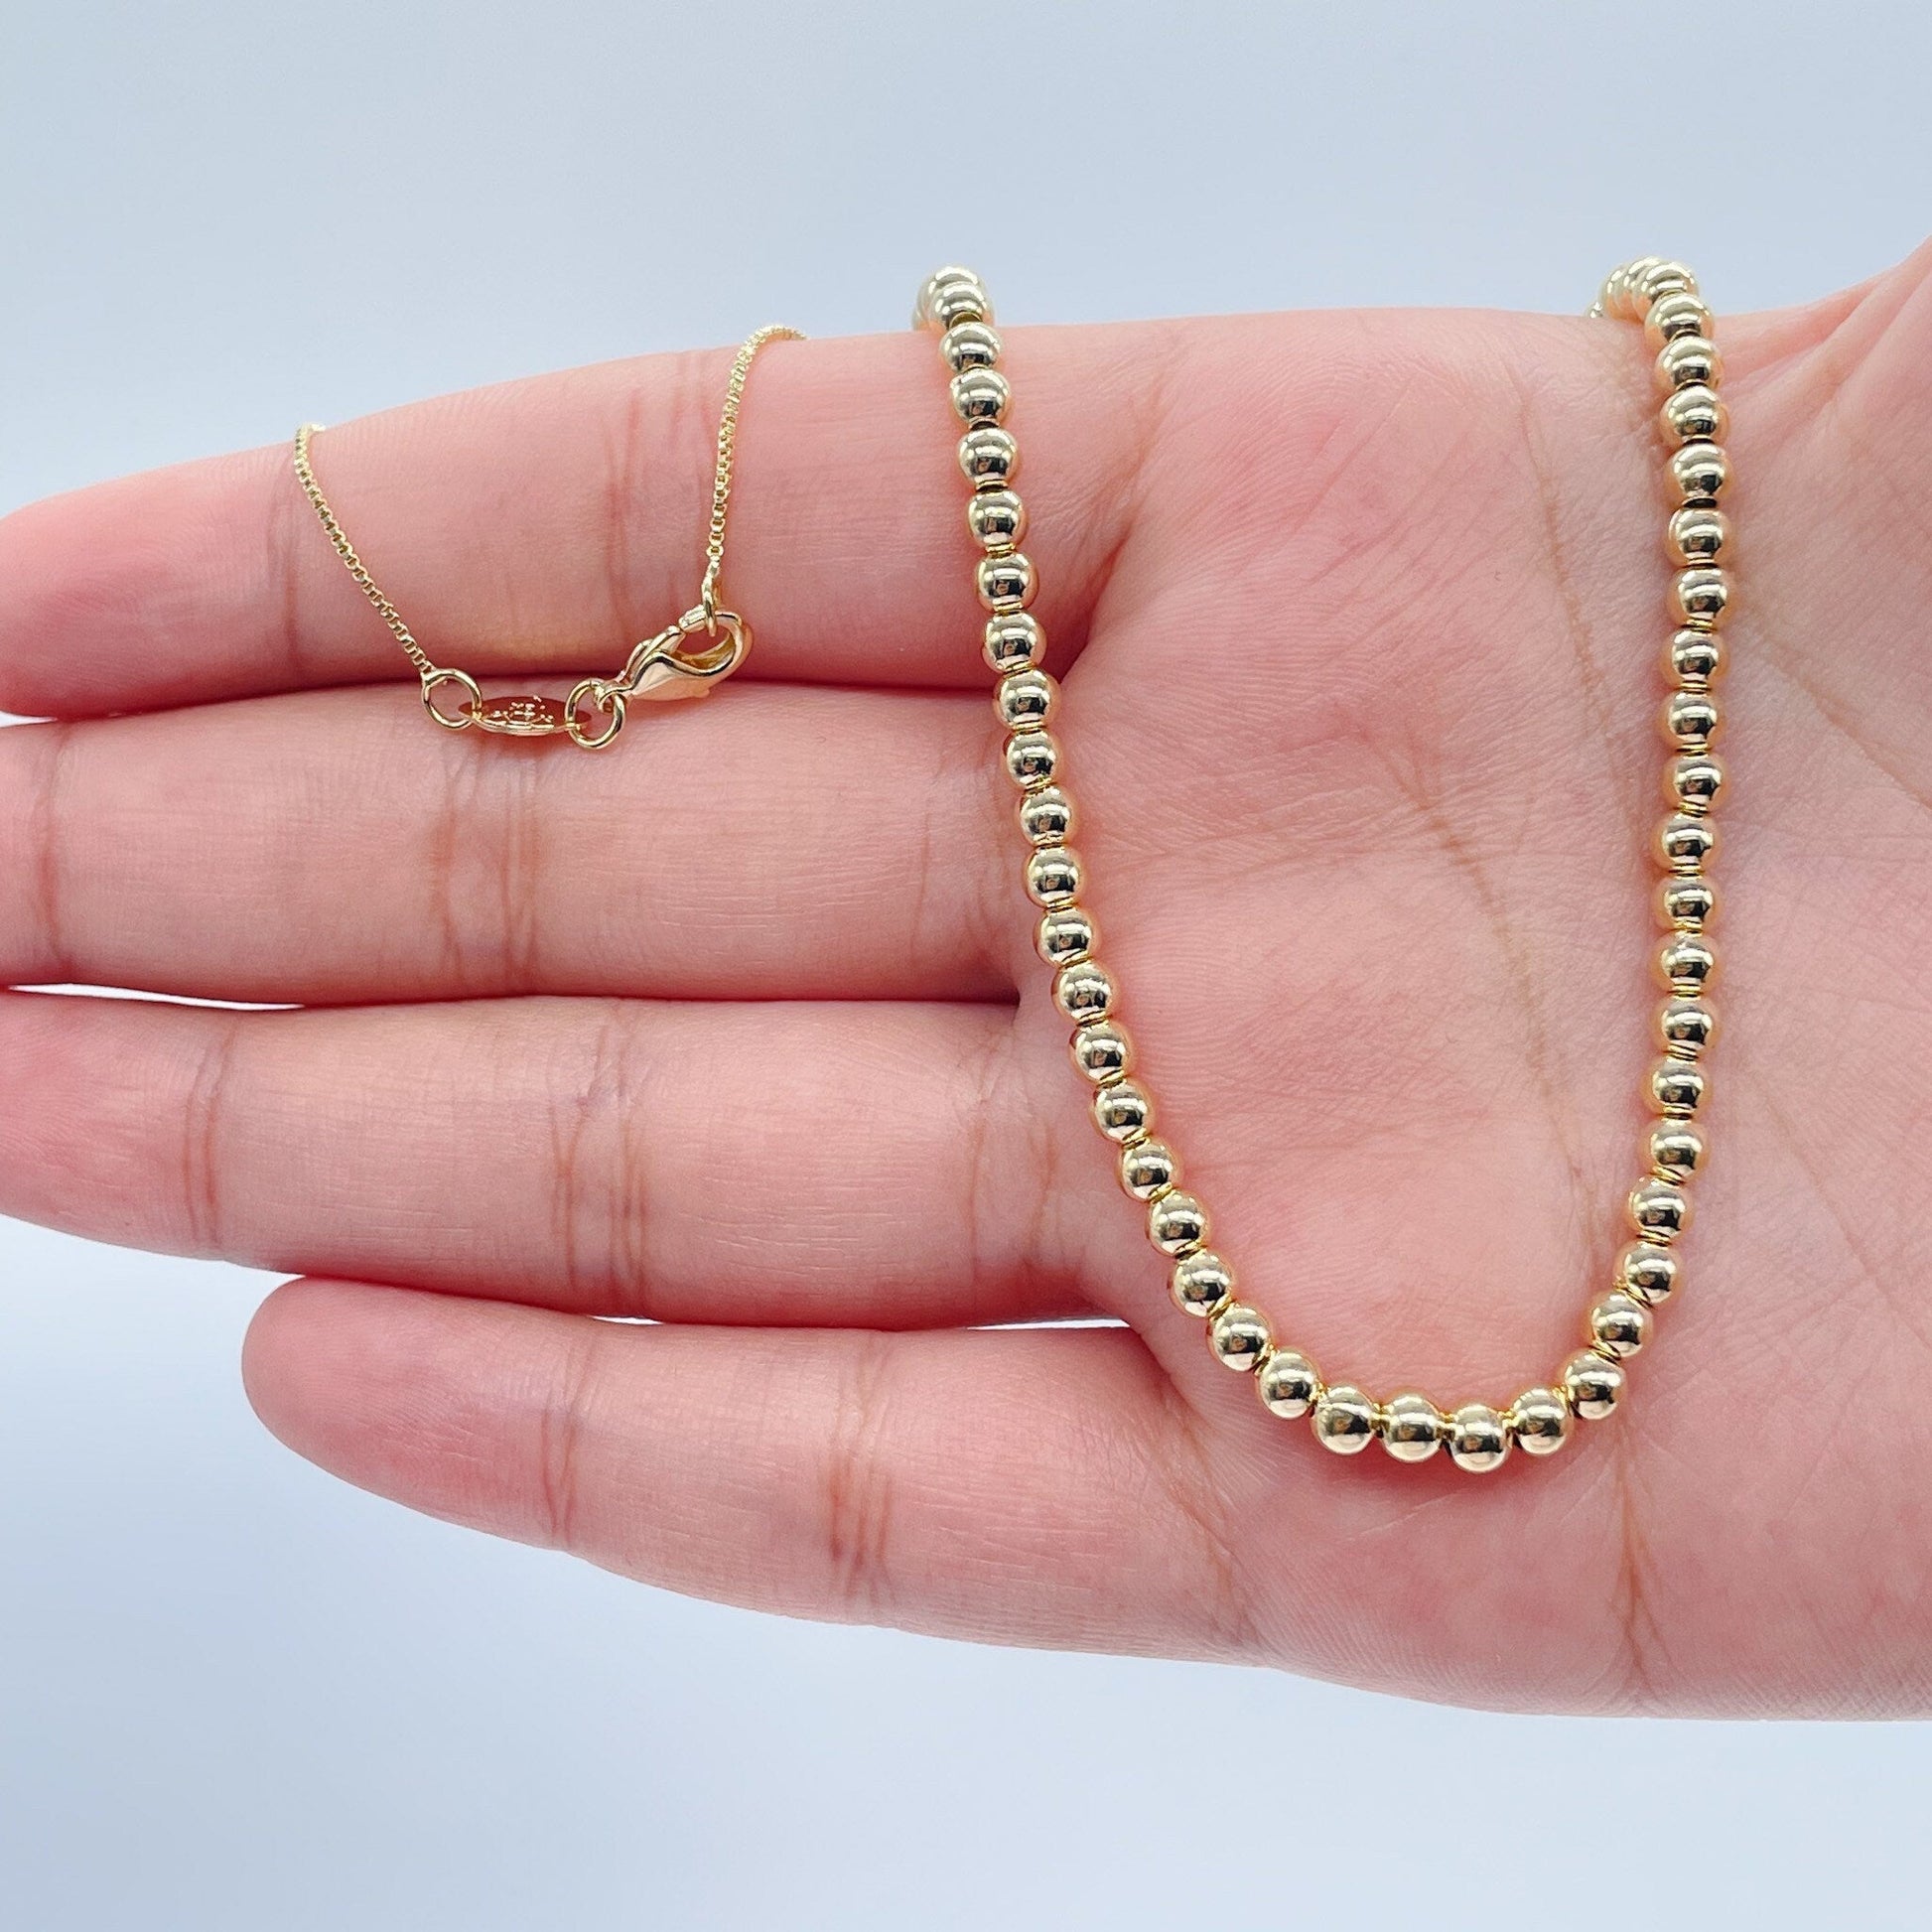 Long Ball Bead Chain Necklace in Matte Gold. - Ball Bead 4m (143665)